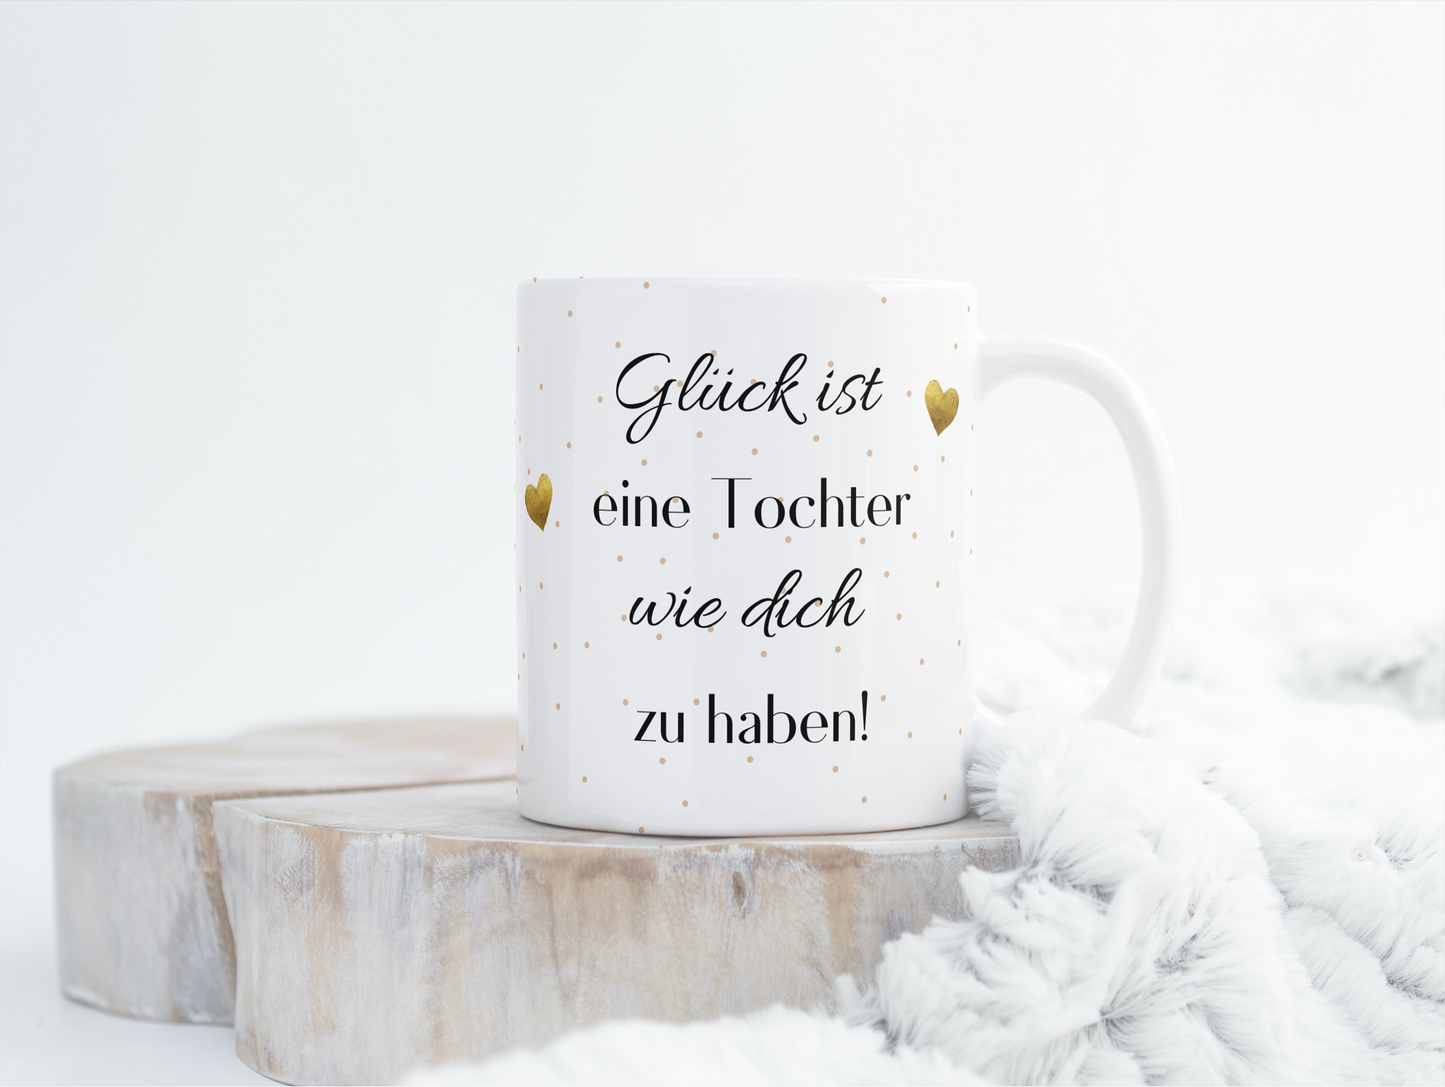 Cup with saying and name/gift for mother/daughter/girlfriend/gift idea/gift favorite person/gift best friend